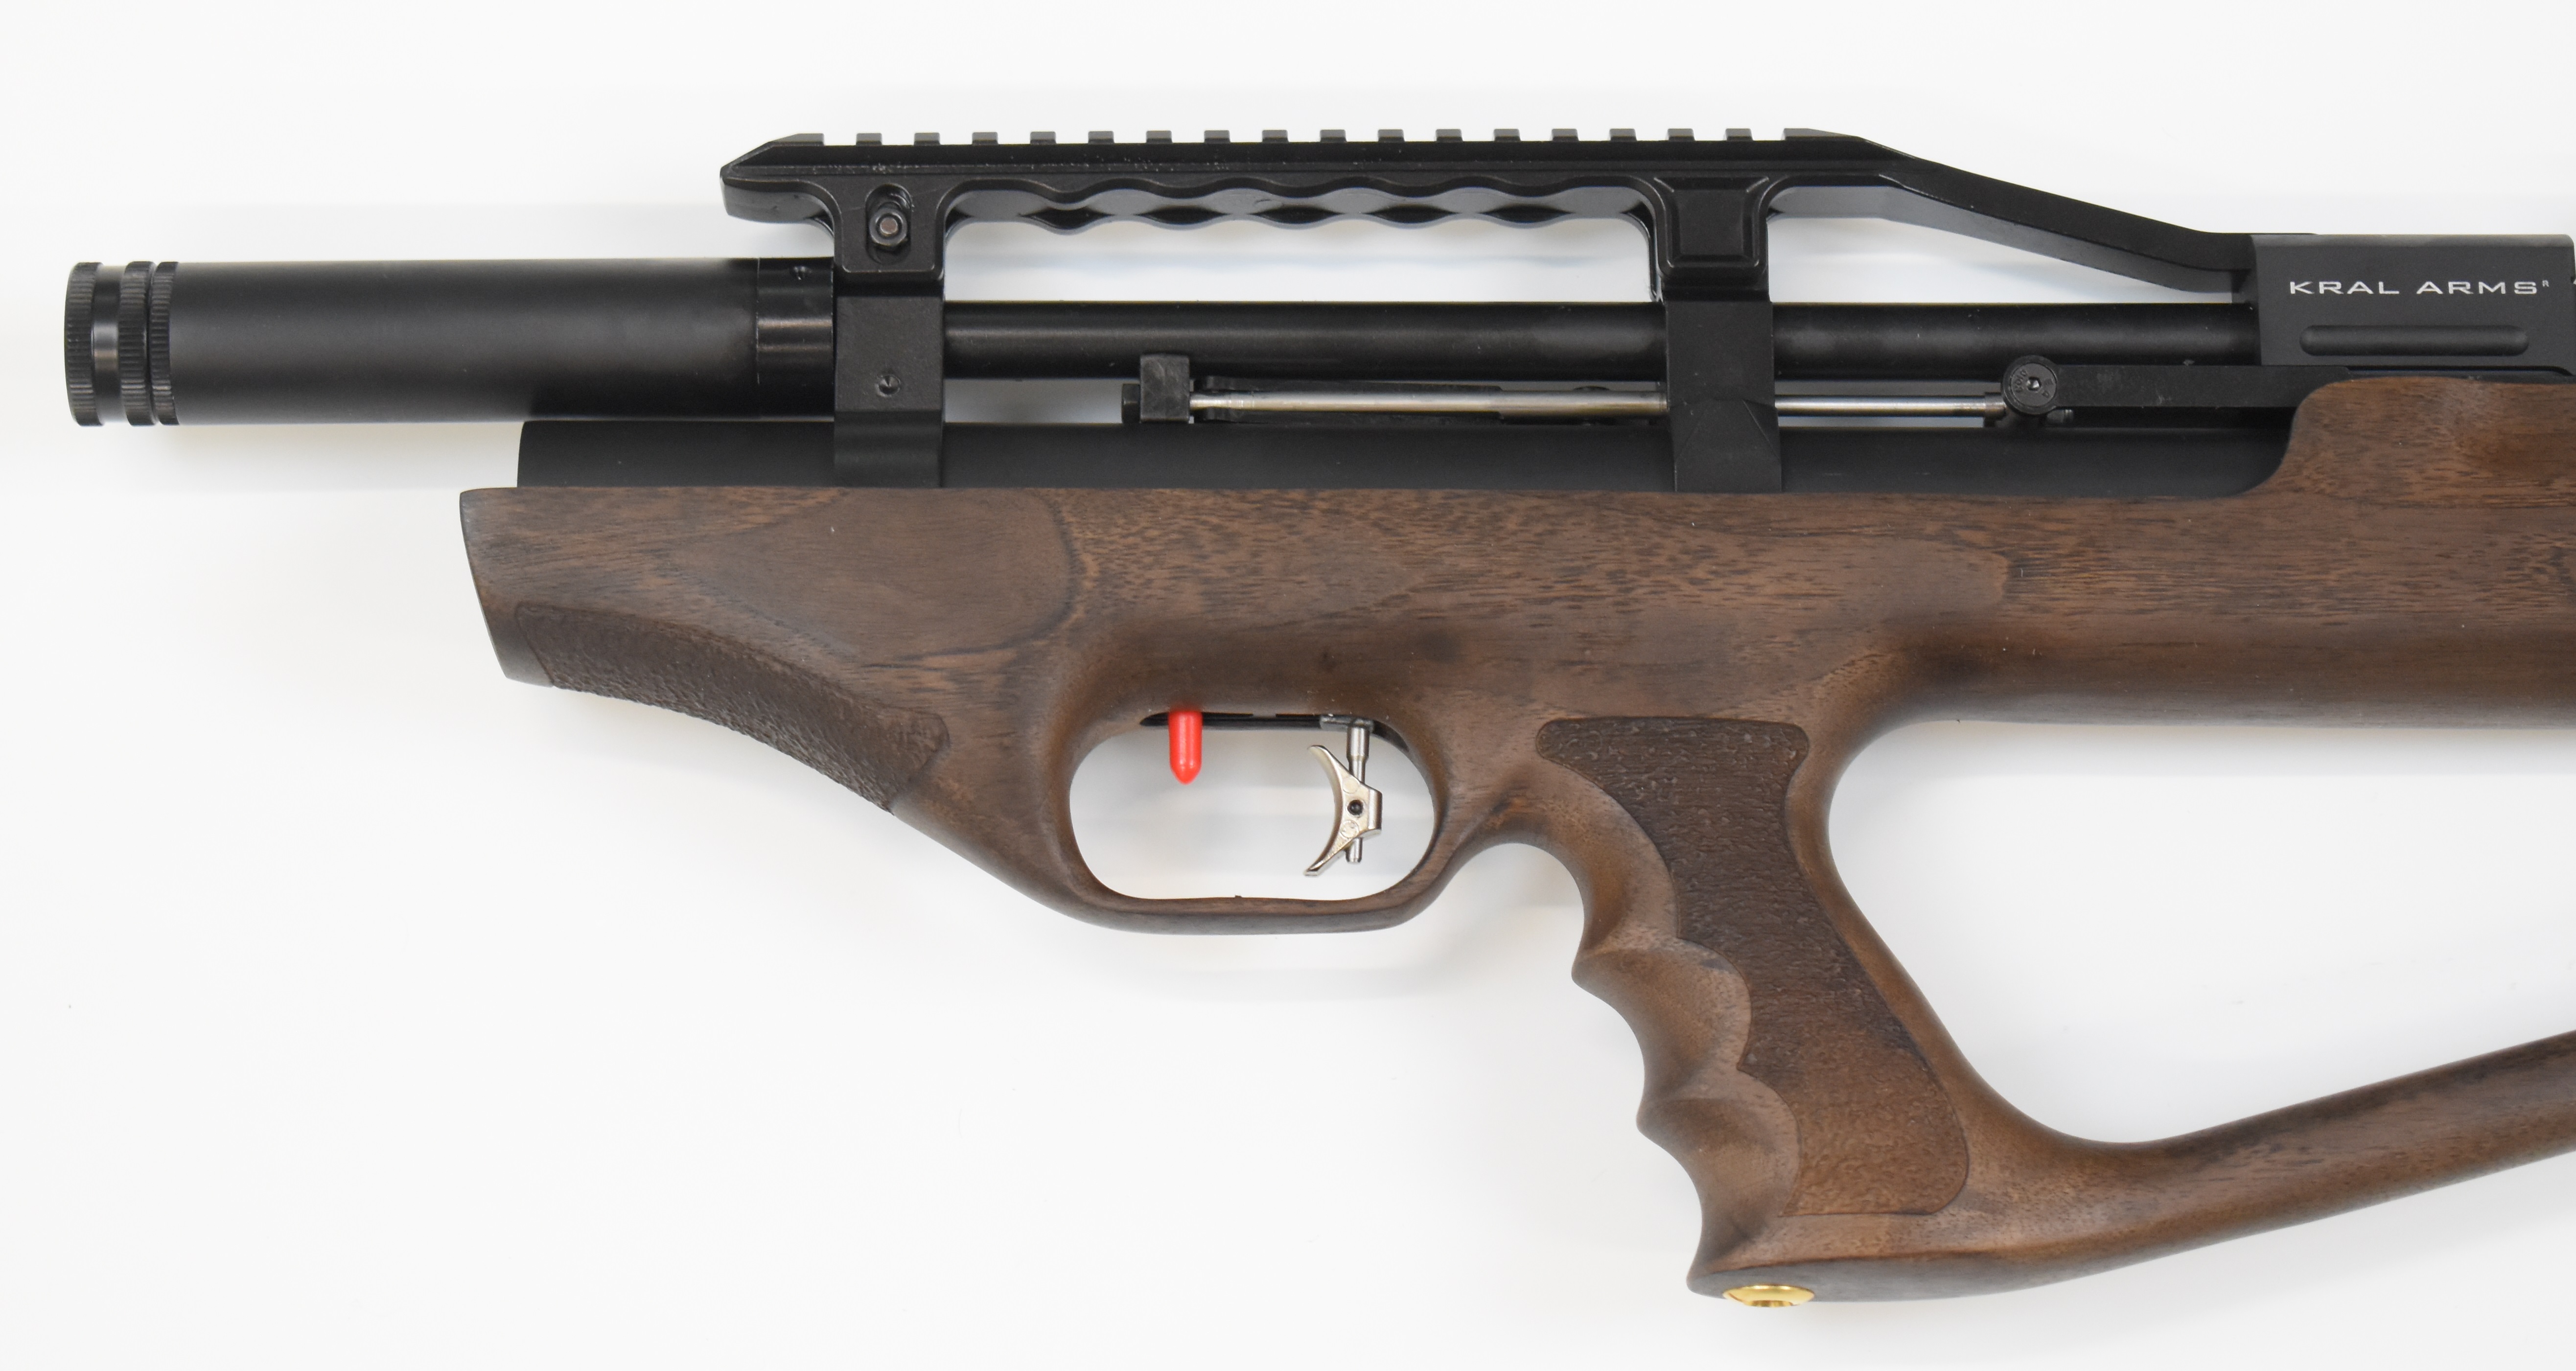 Kral Puncher Empire XS .177 PCP carbine air rifle with textured pistol grip, two 14-shot magazines - Image 8 of 9